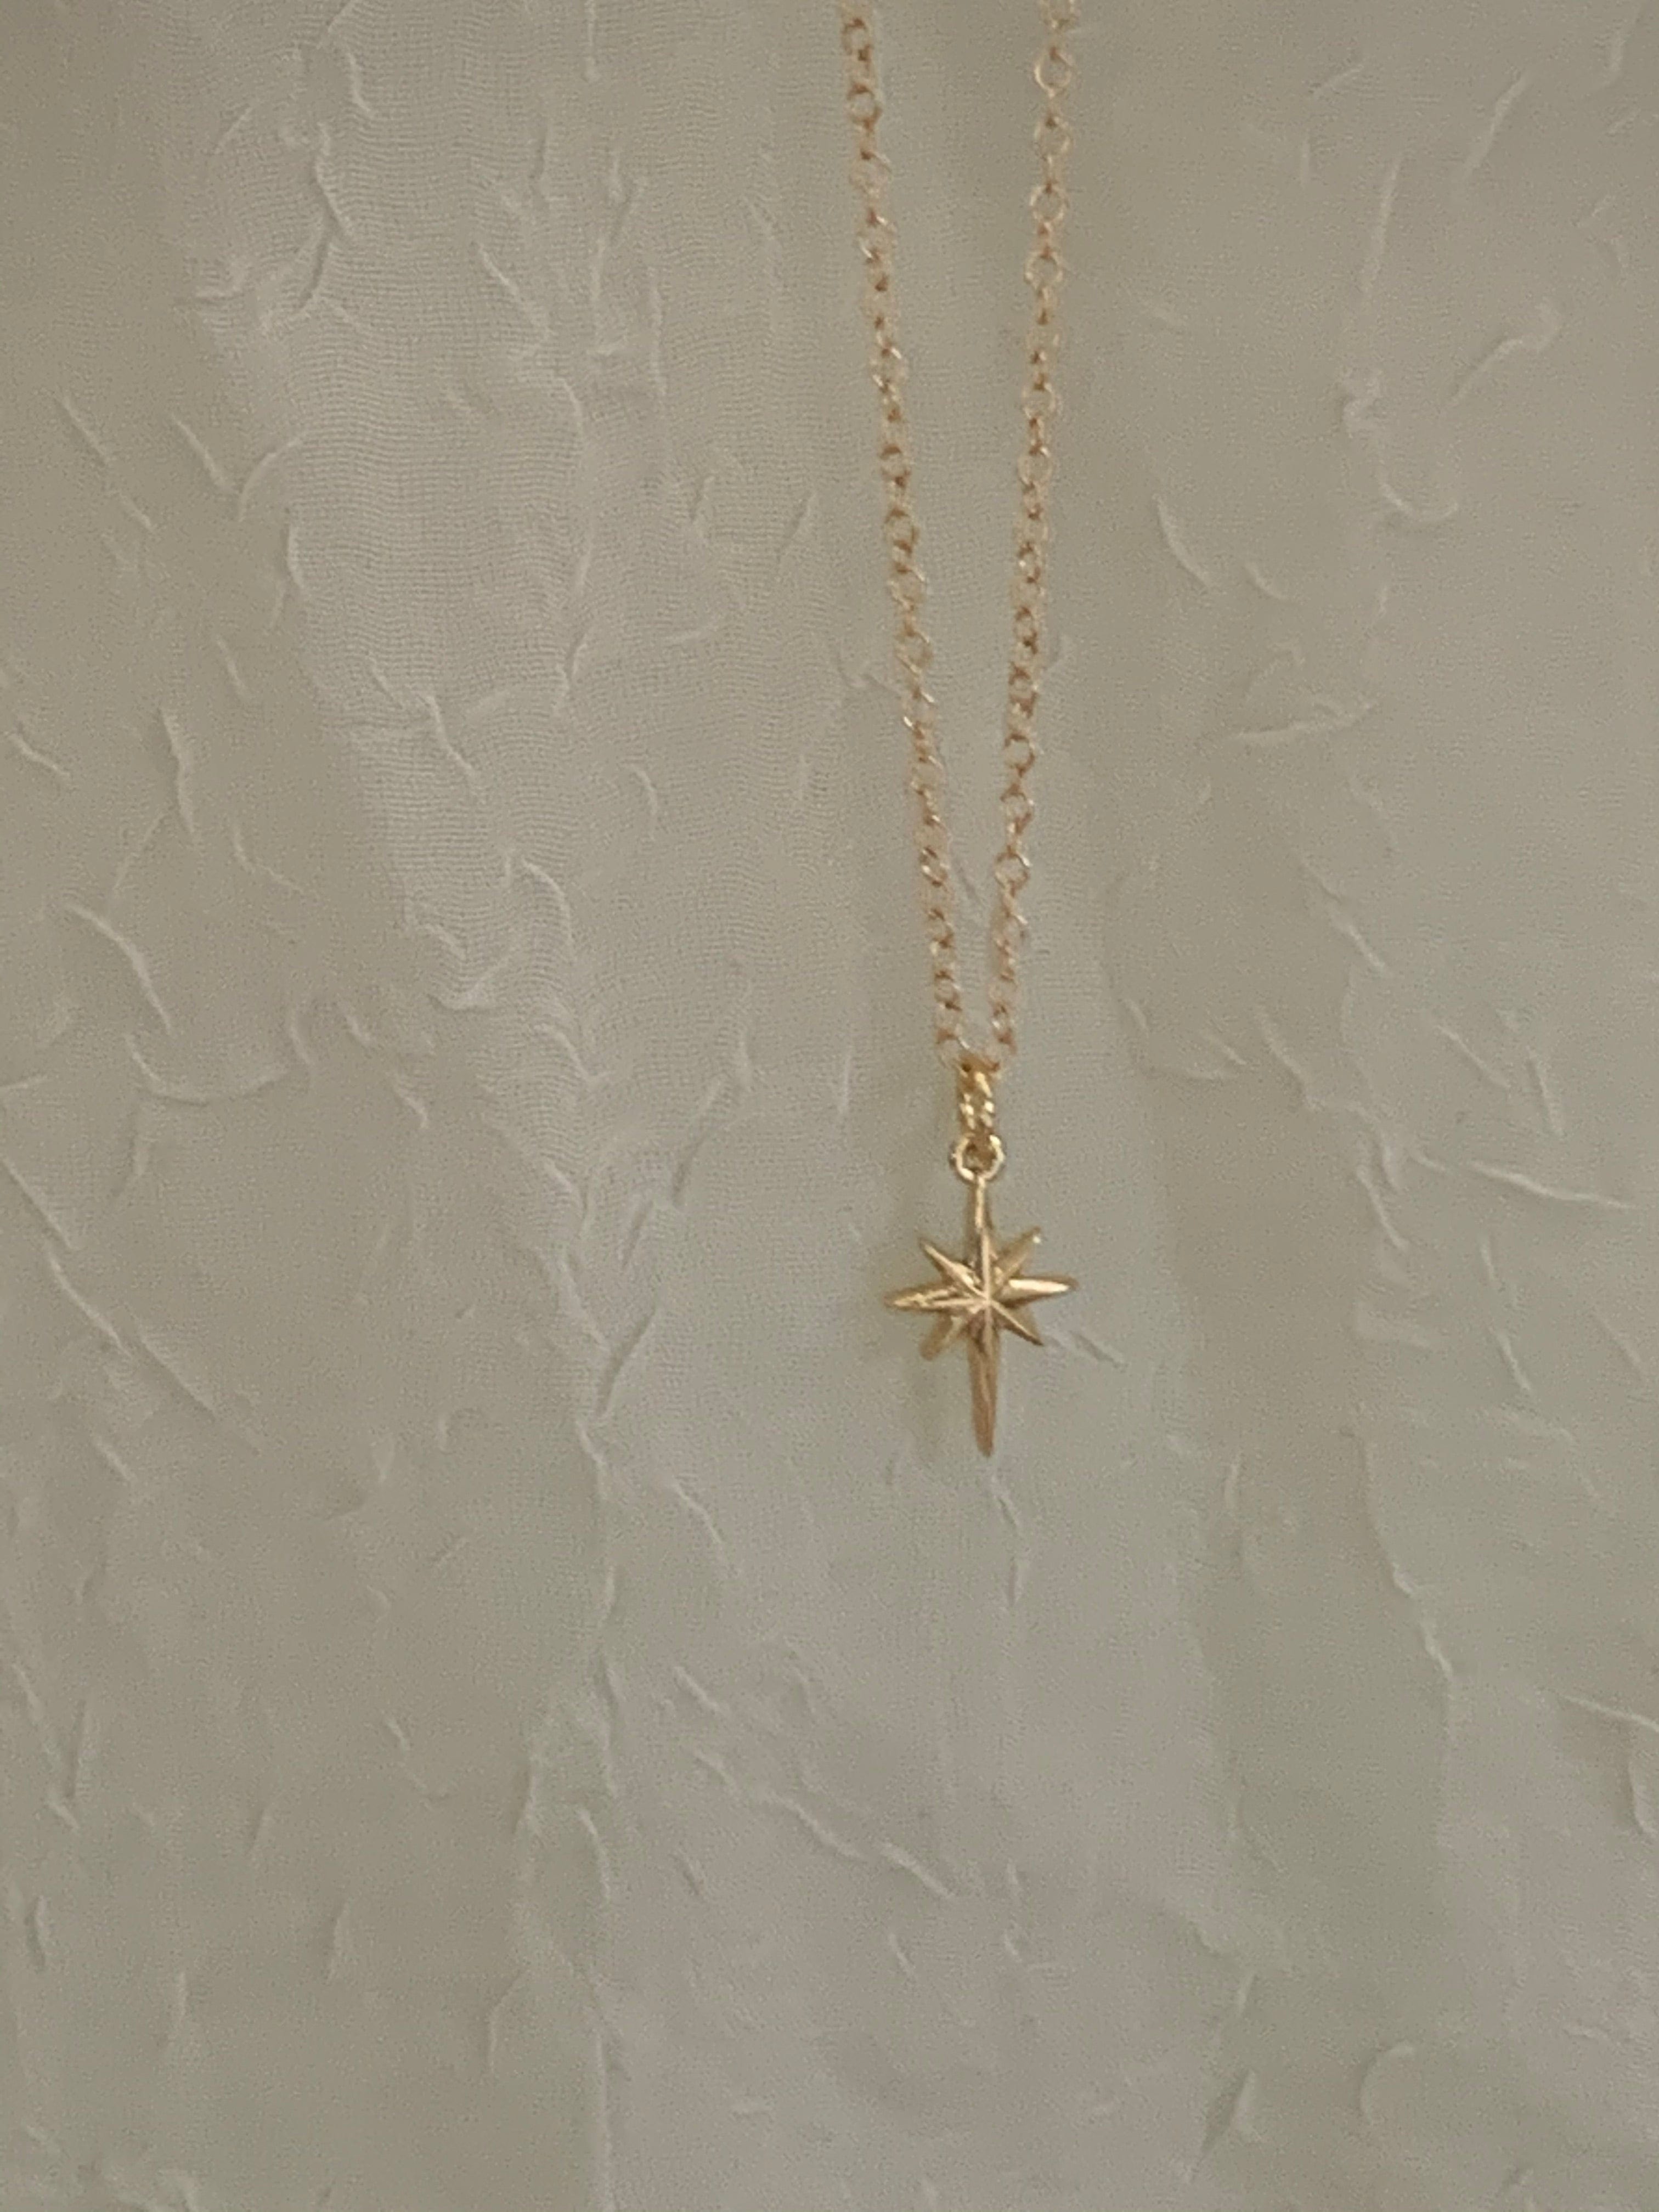 North Star Charm Necklace - Jewelers Garden